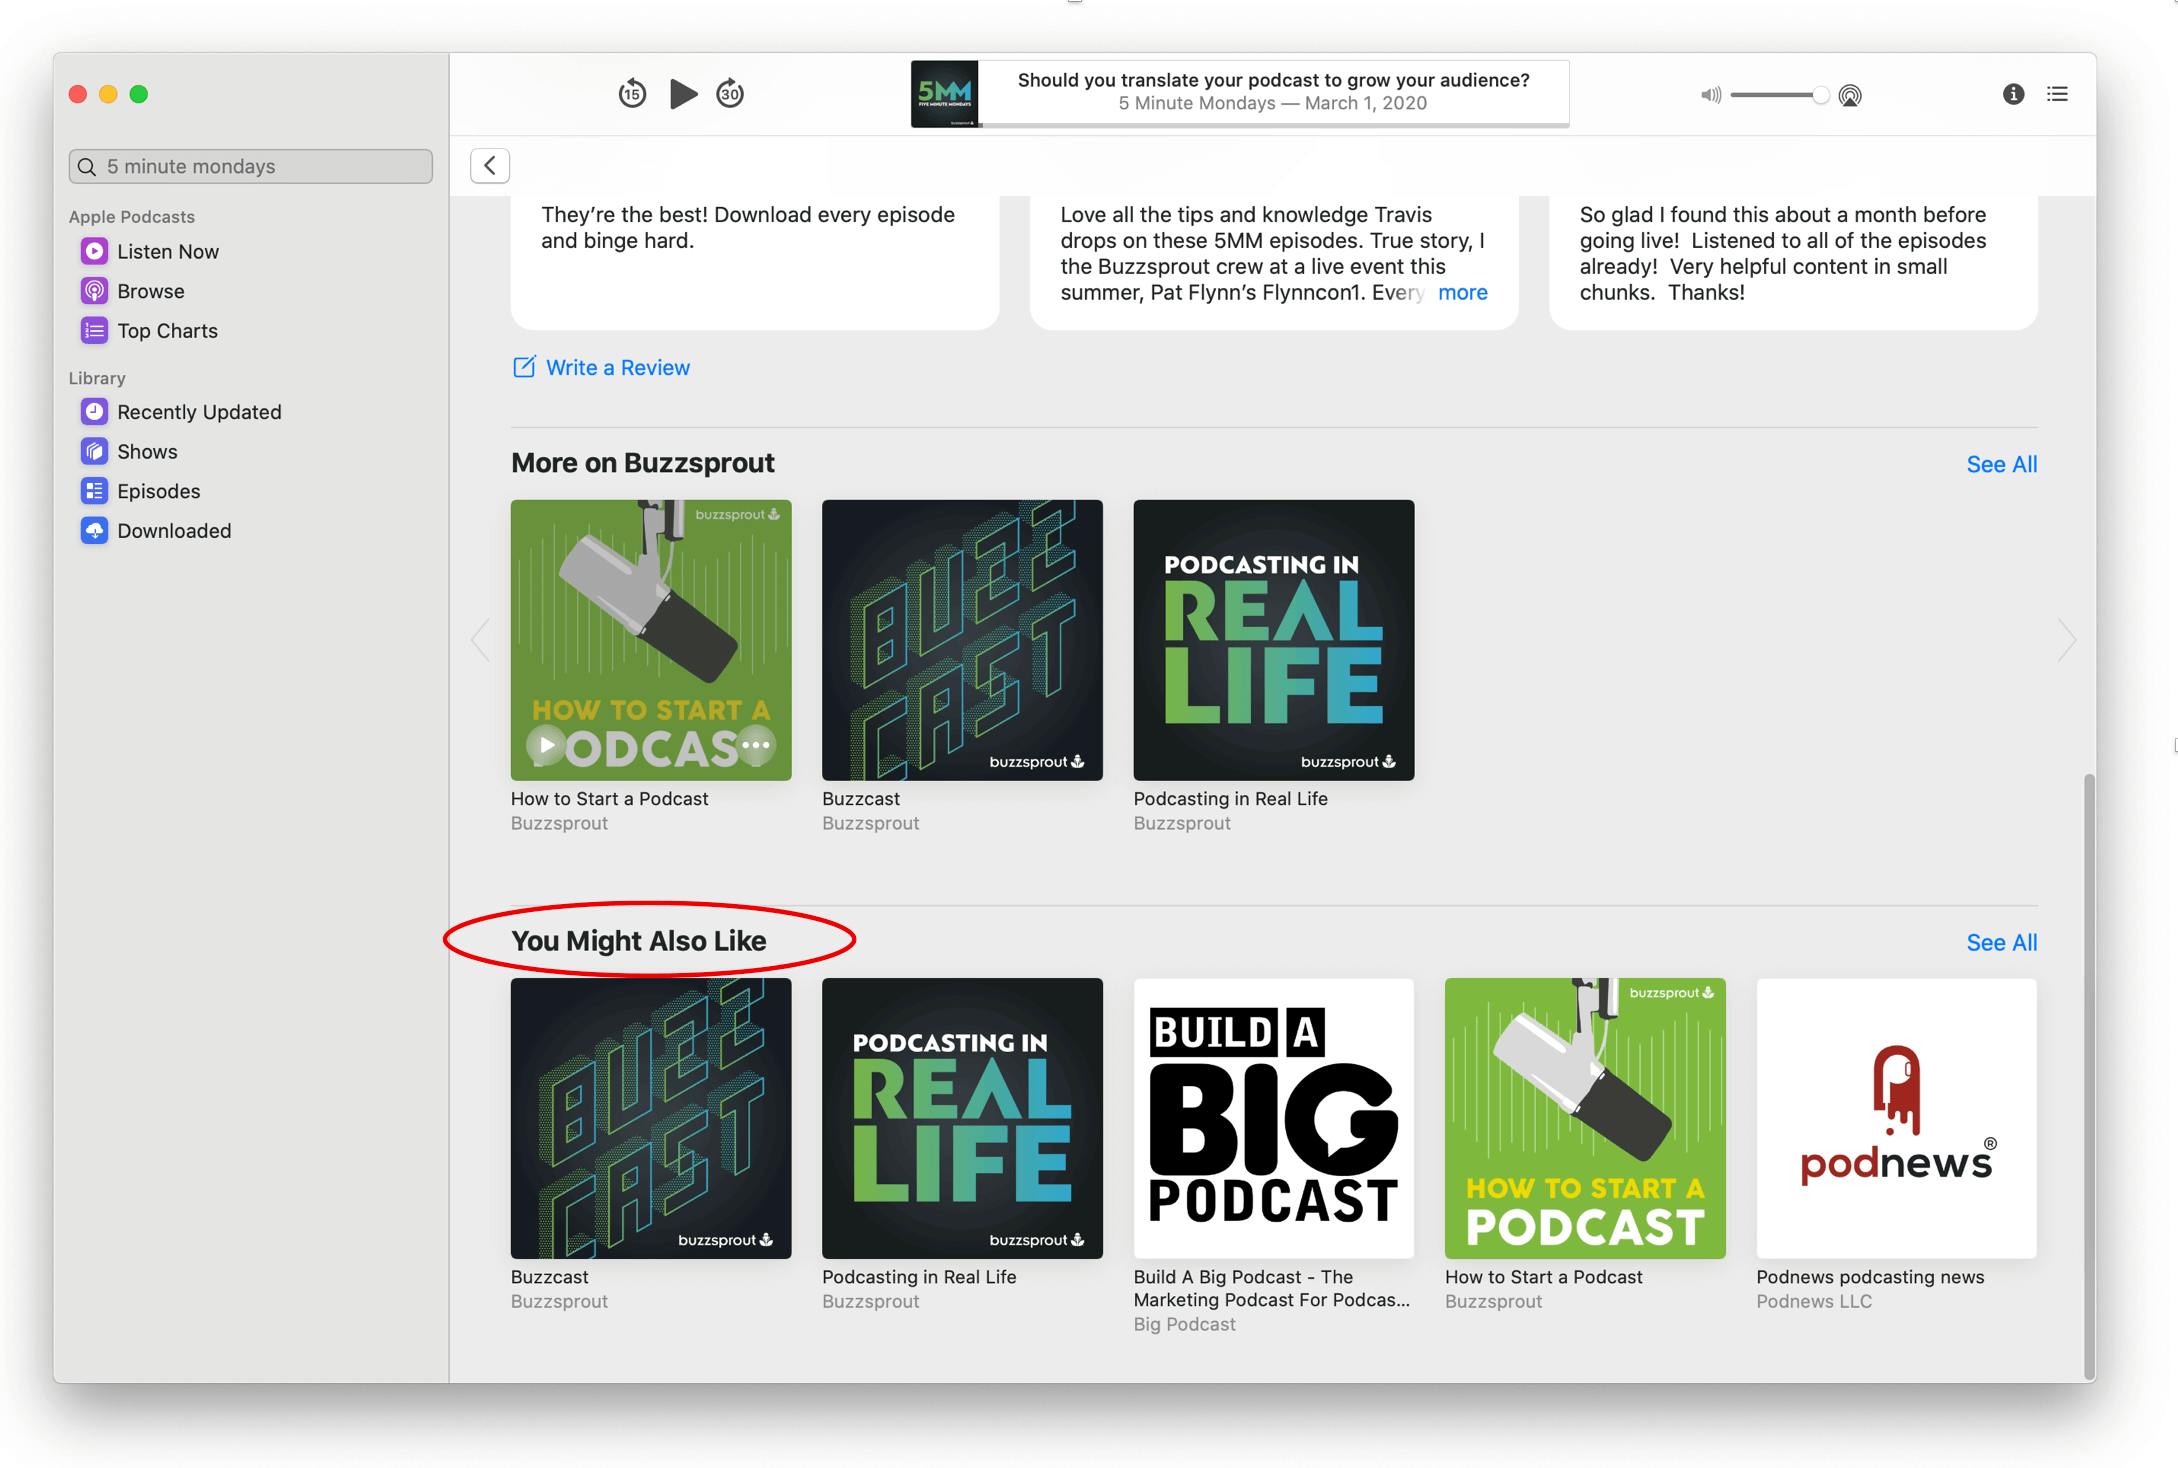 The You Might Also Like section circled in Apple Podcasts